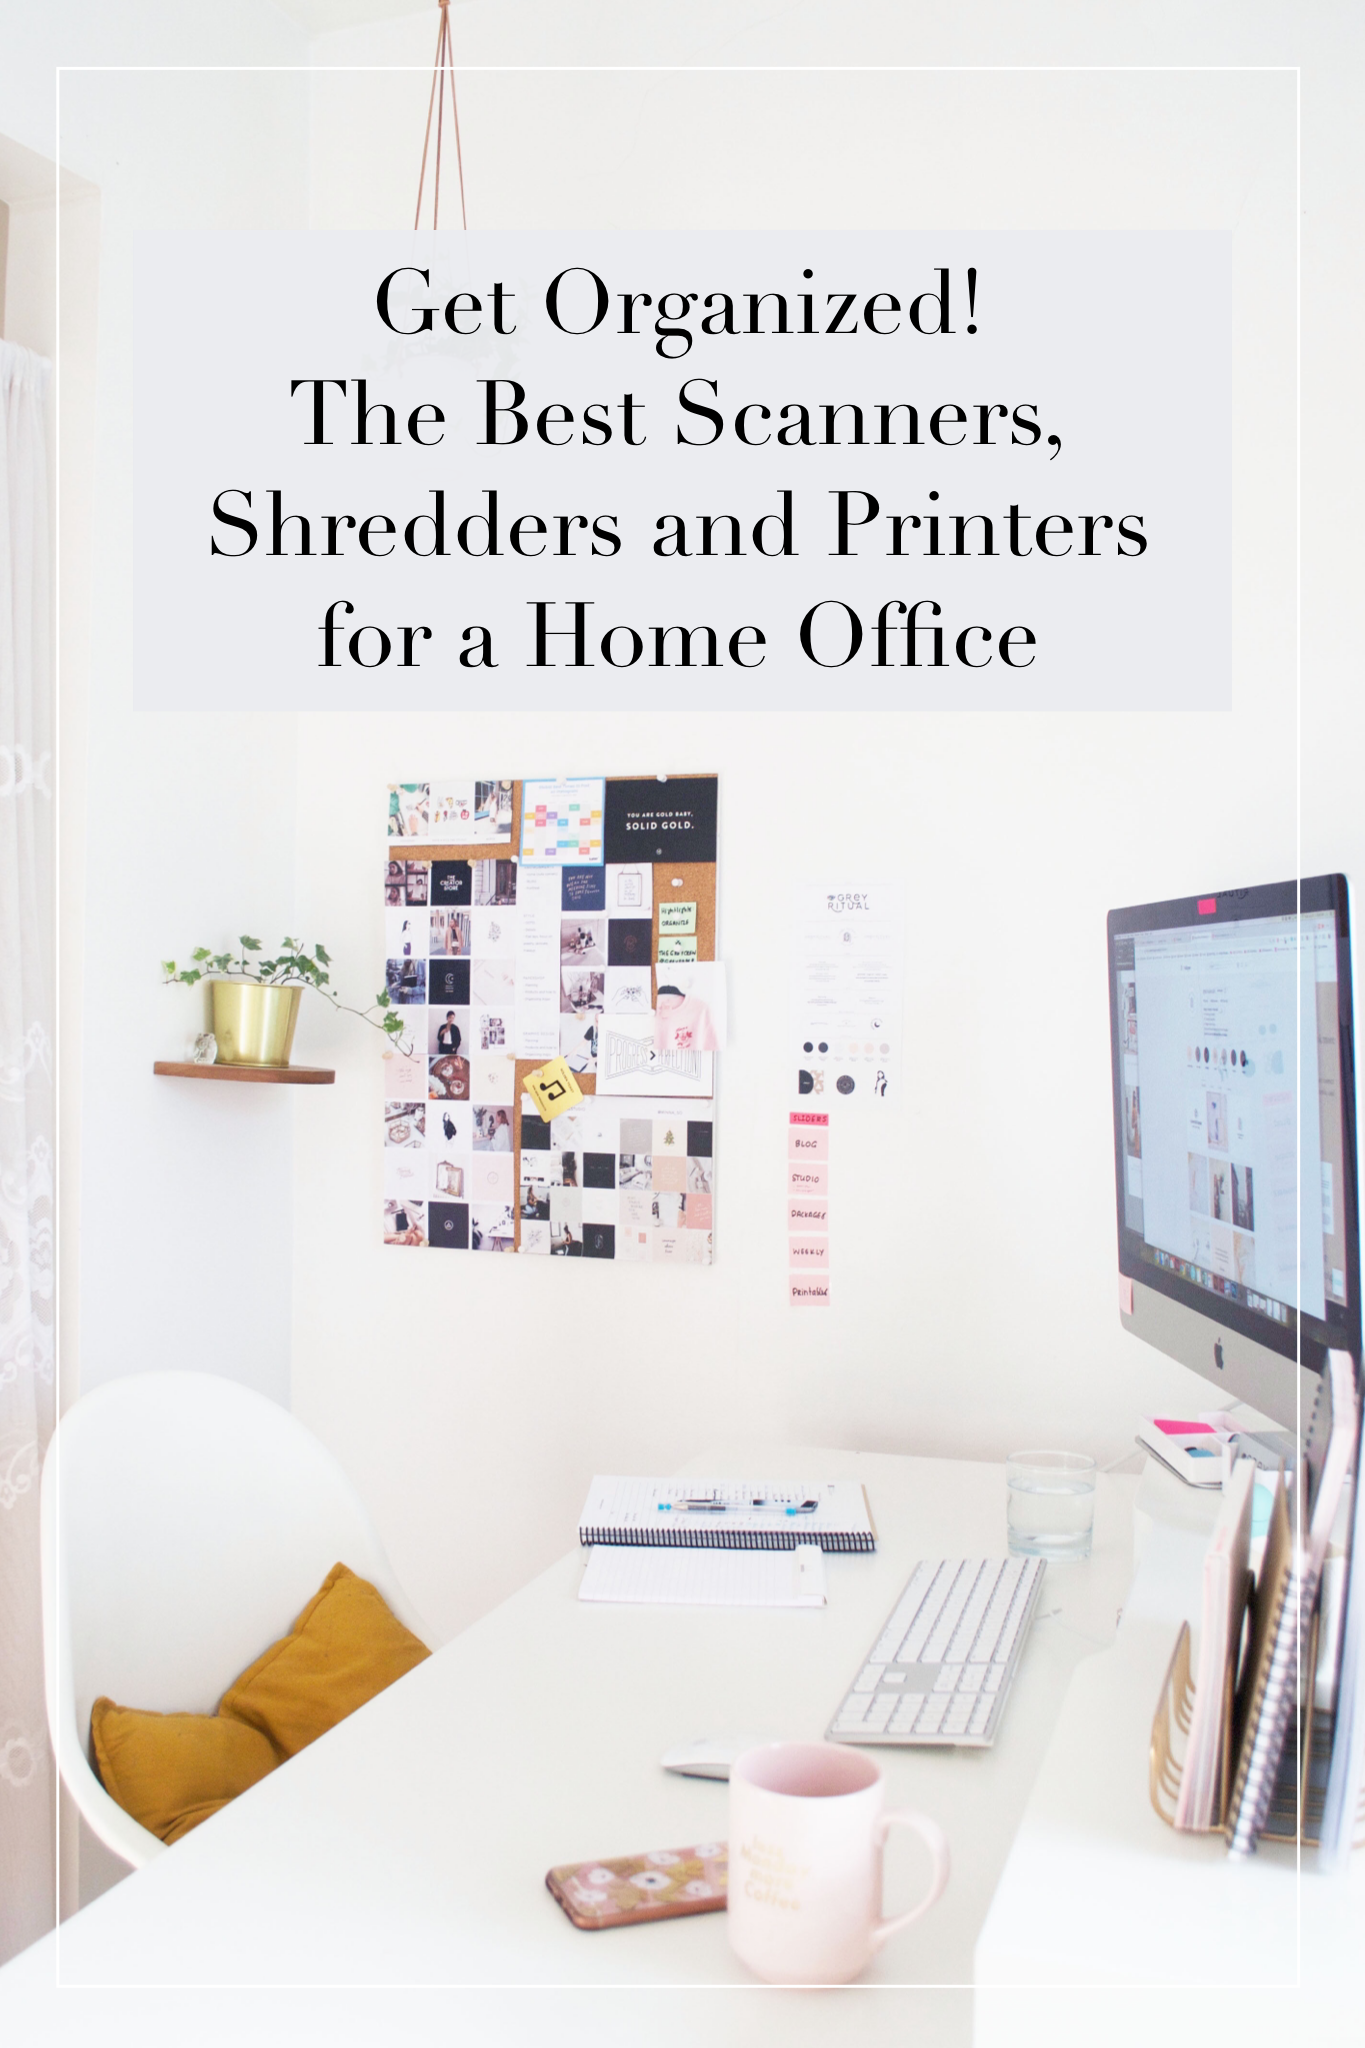 Is your desk a mess? Papers everywhere and you can't see through the pile? Get organized with scanners, shredders and printers!